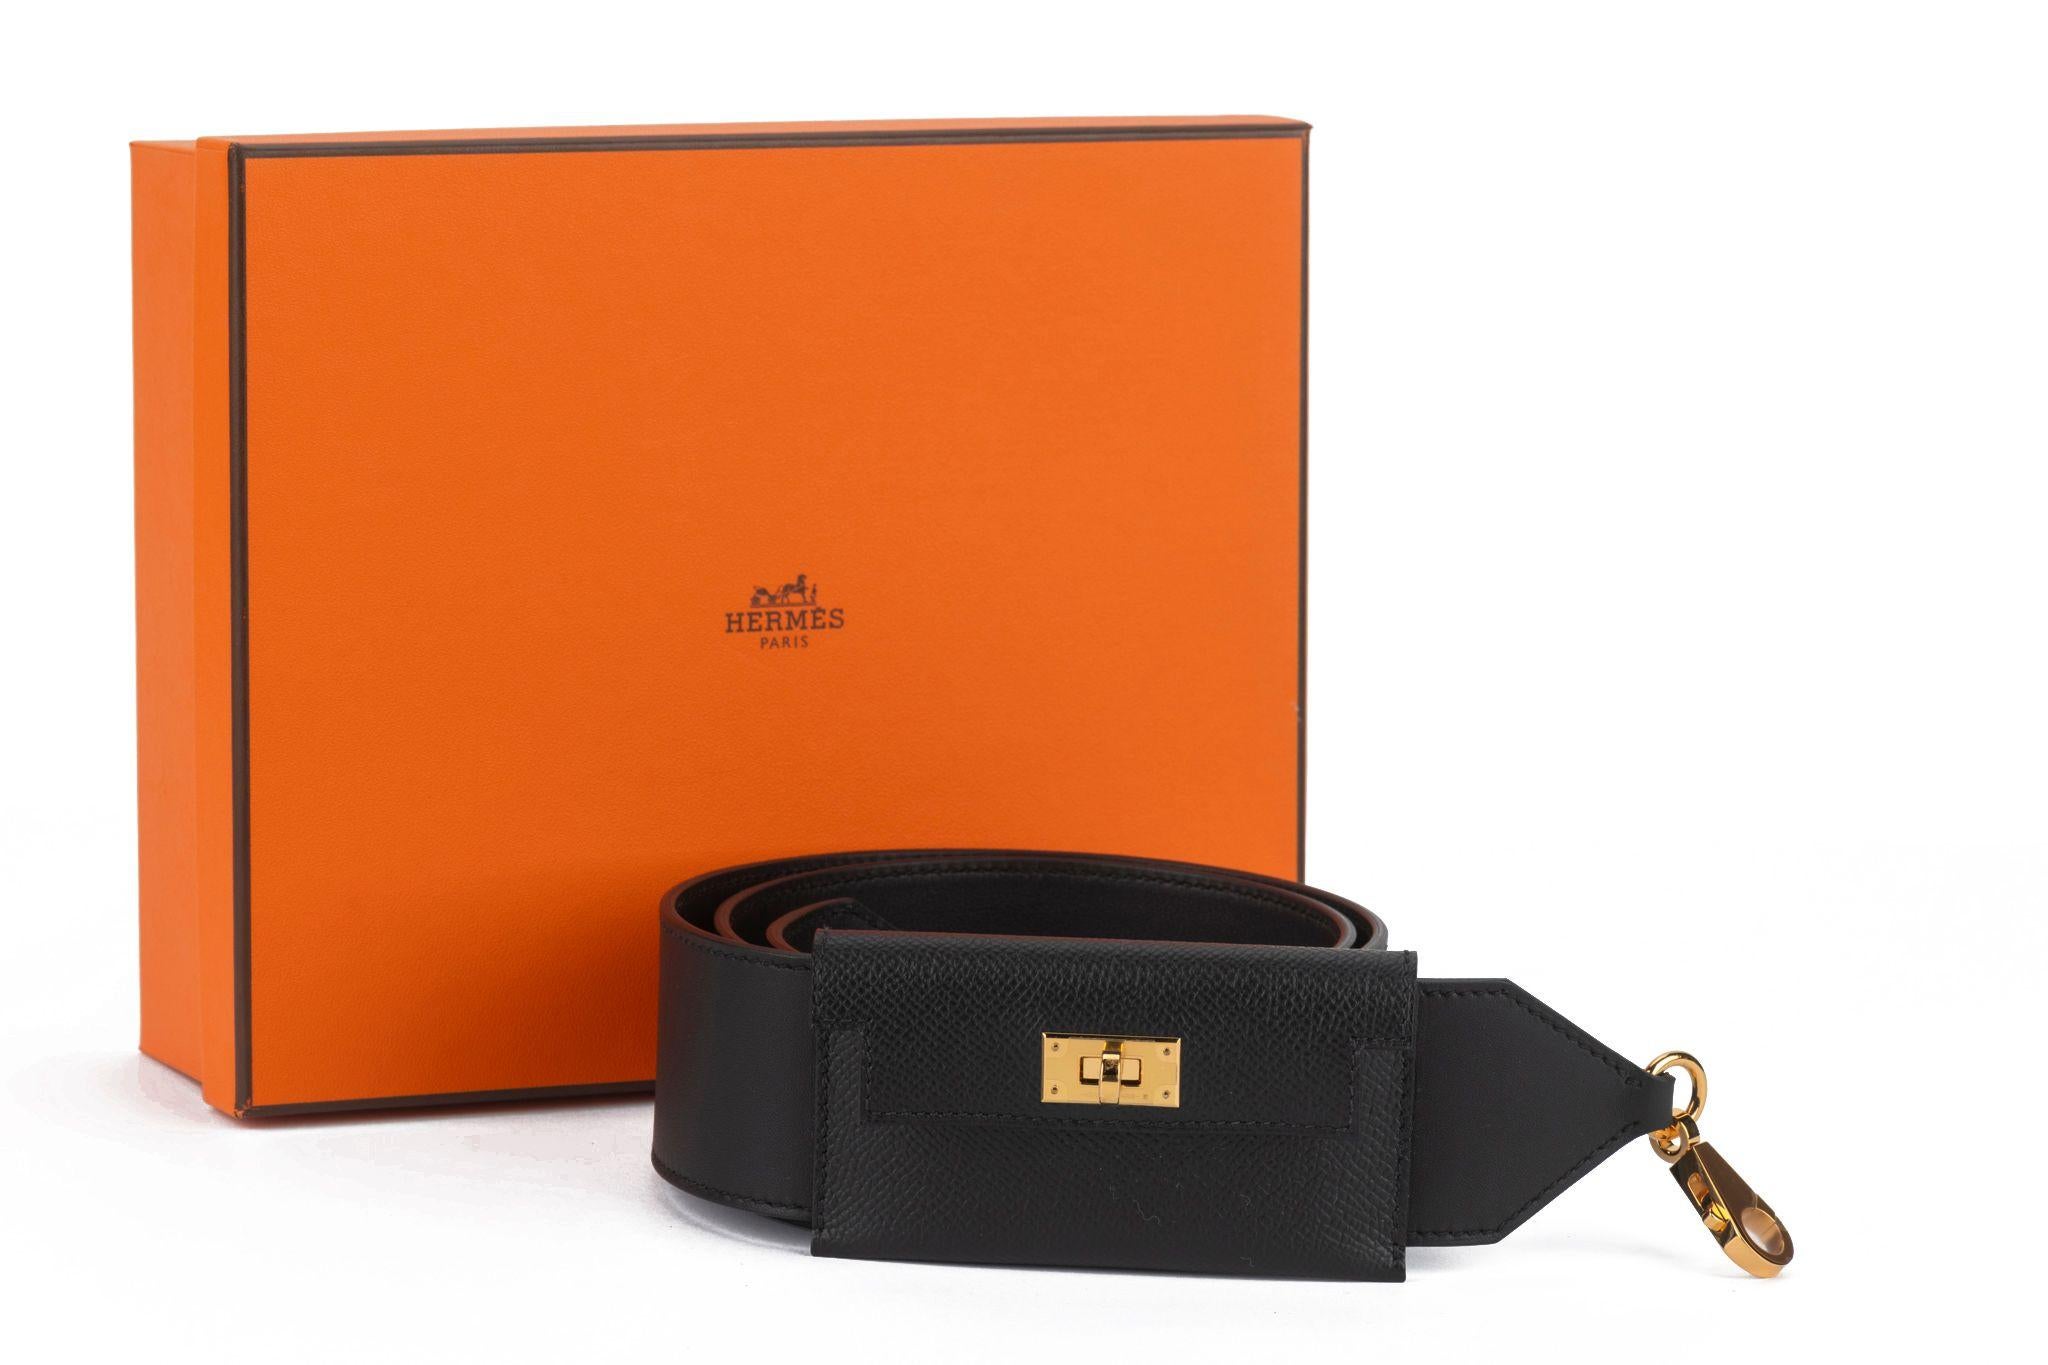 New Hermès bandouliere Kelly black leather shoulder strap. Black leather pocket in epsom leather with gold tone hardware closure Comes with booklet, dust cover and original box. Pocket dimensions 4.30